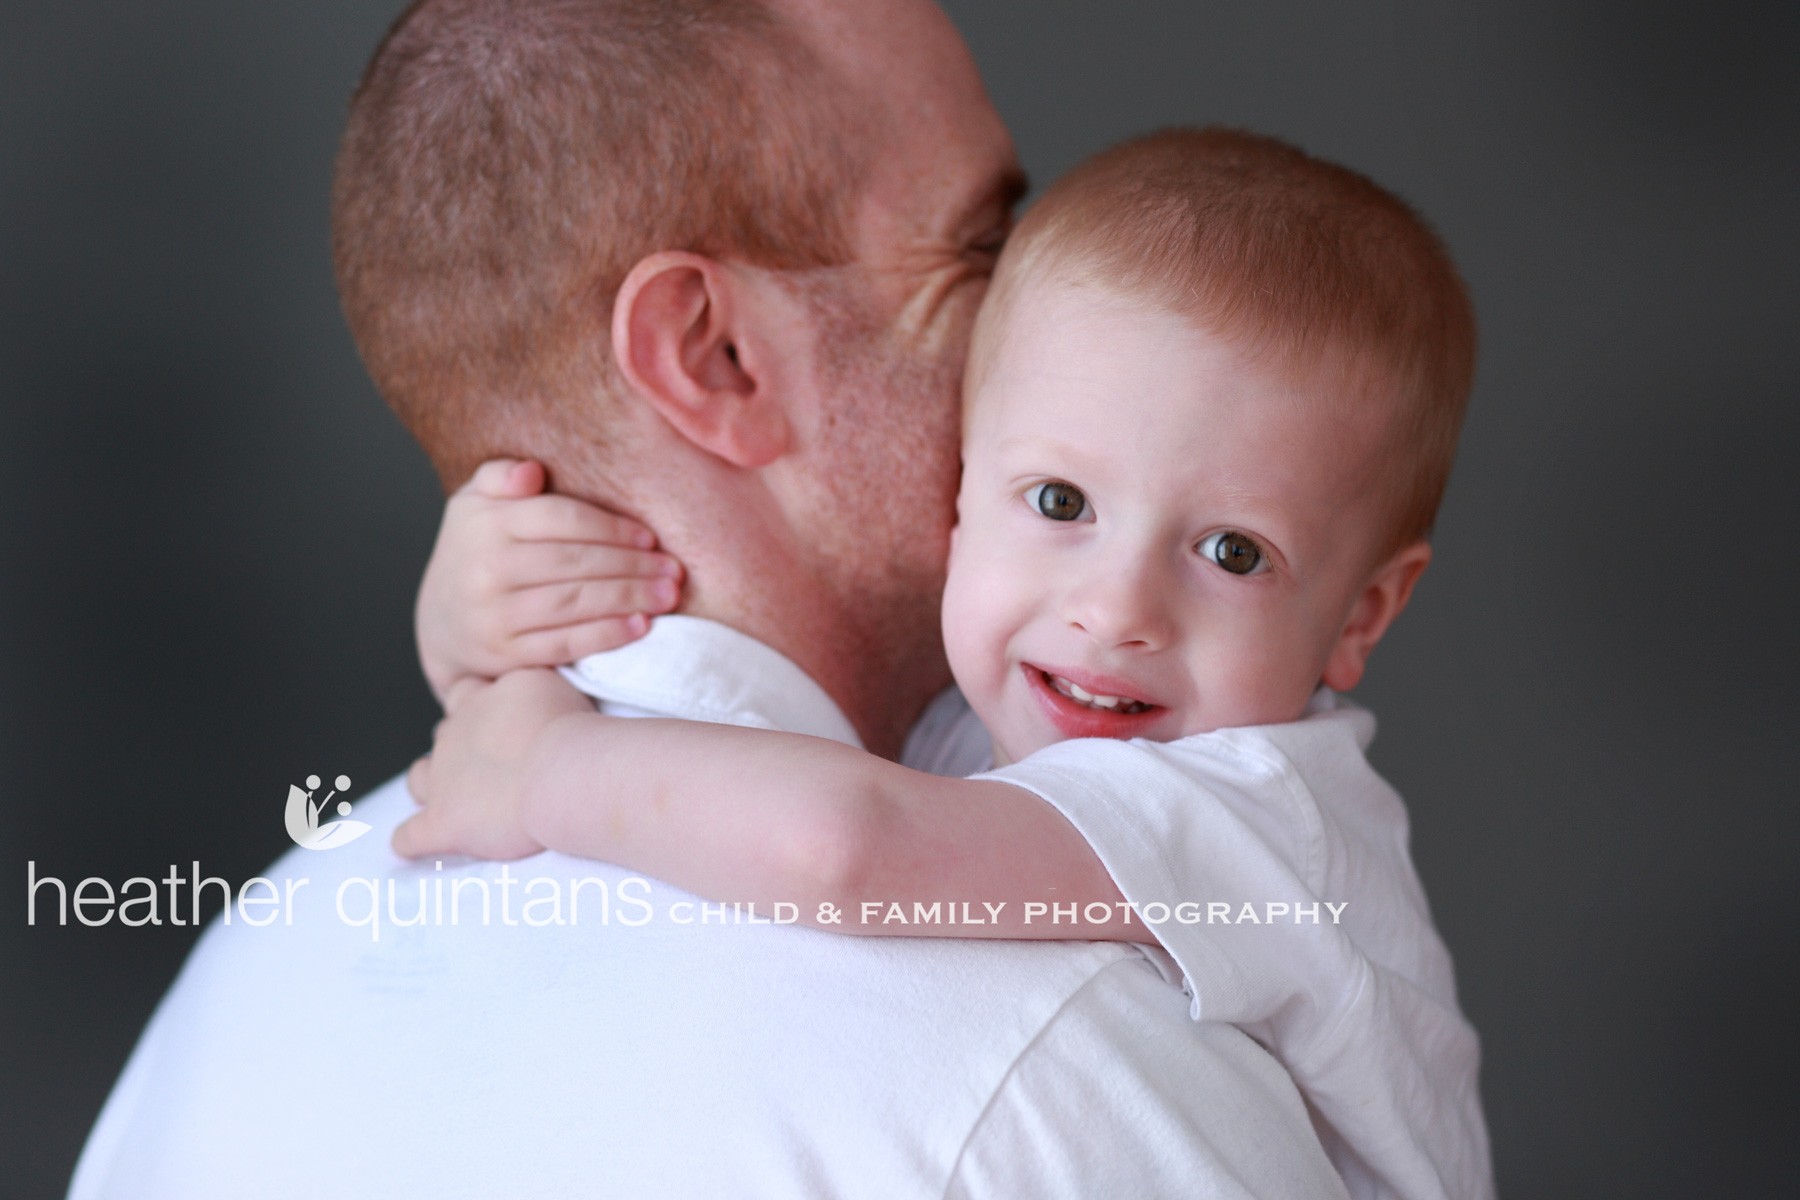 Son and Dad photographed at Heather Quintans Studio with natural light